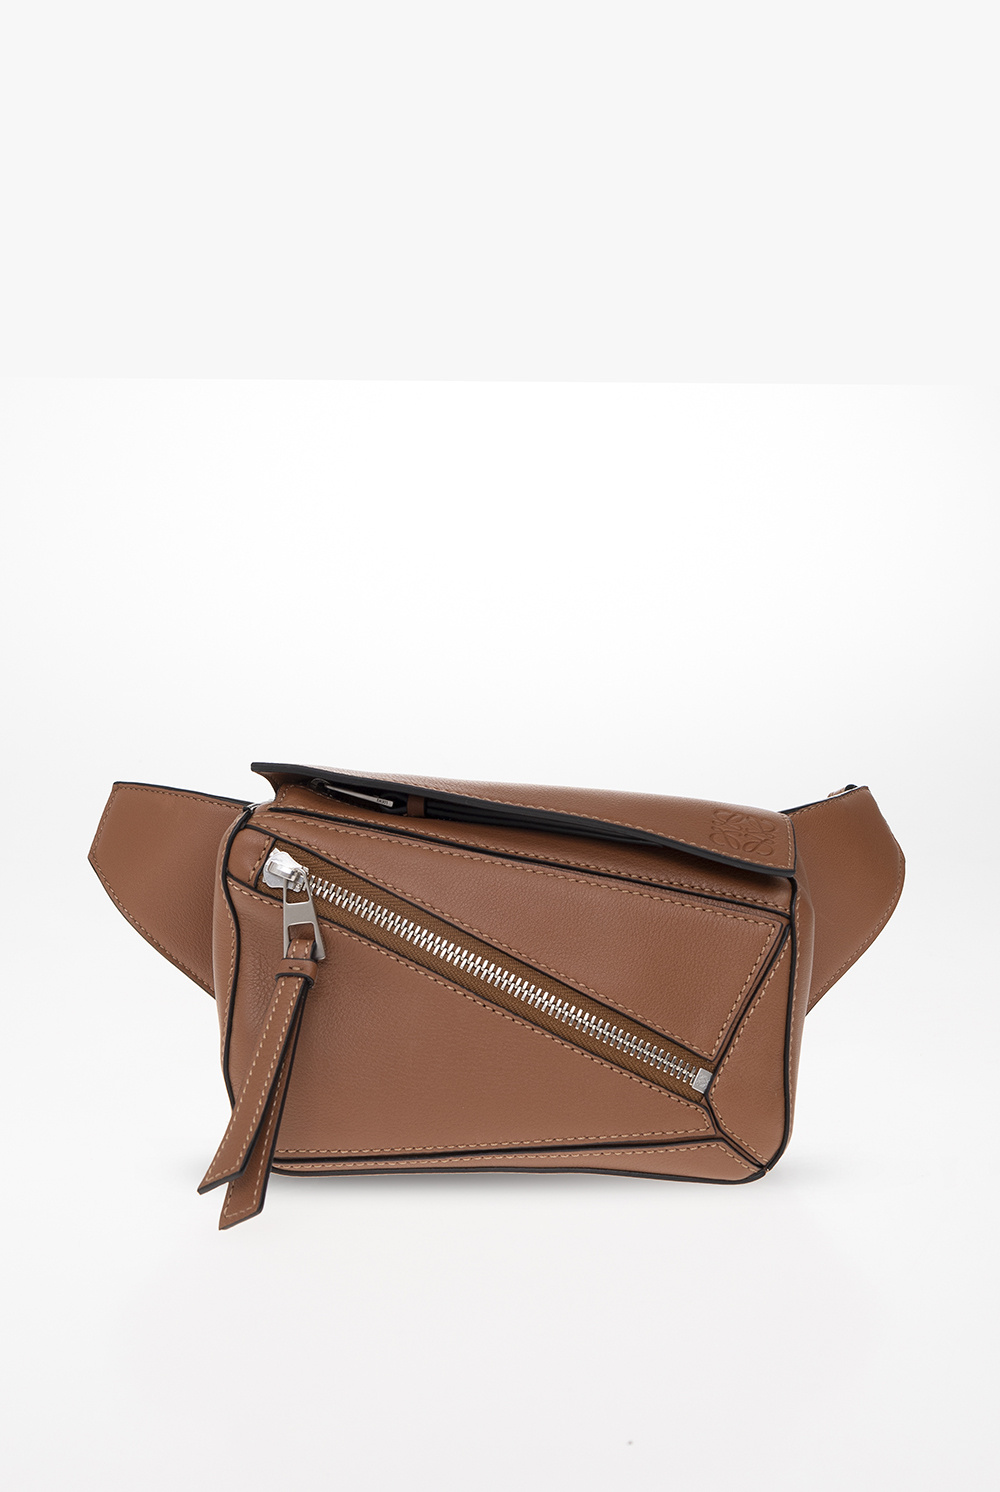 Loewe Small Leather Puzzle Belt Bag